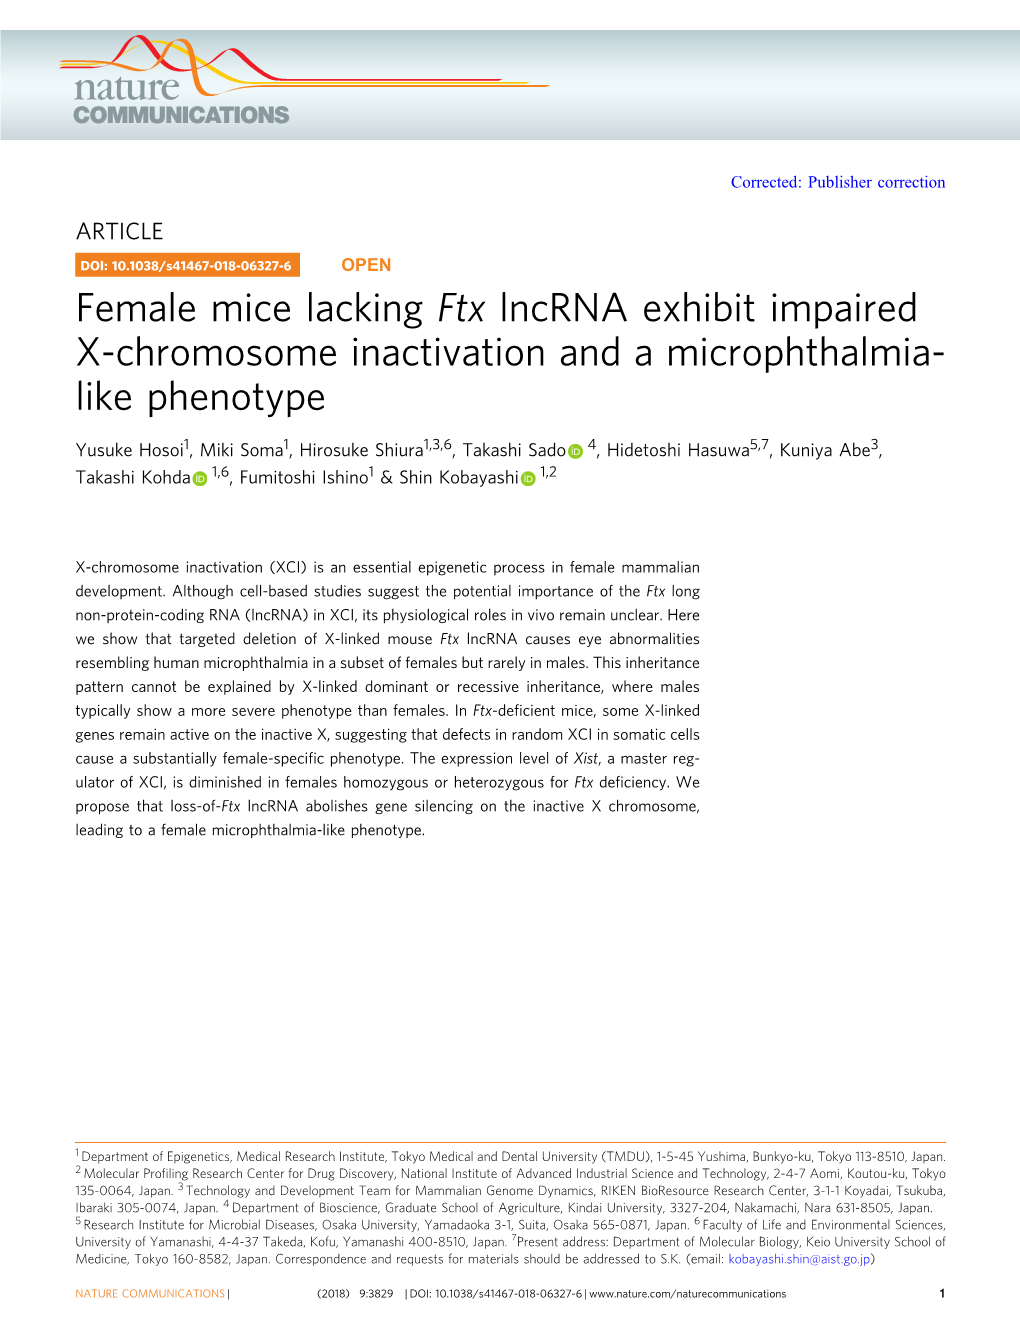 Female Mice Lacking Ftx Lncrna Exhibit Impaired X-Chromosome Inactivation and a Microphthalmia- Like Phenotype